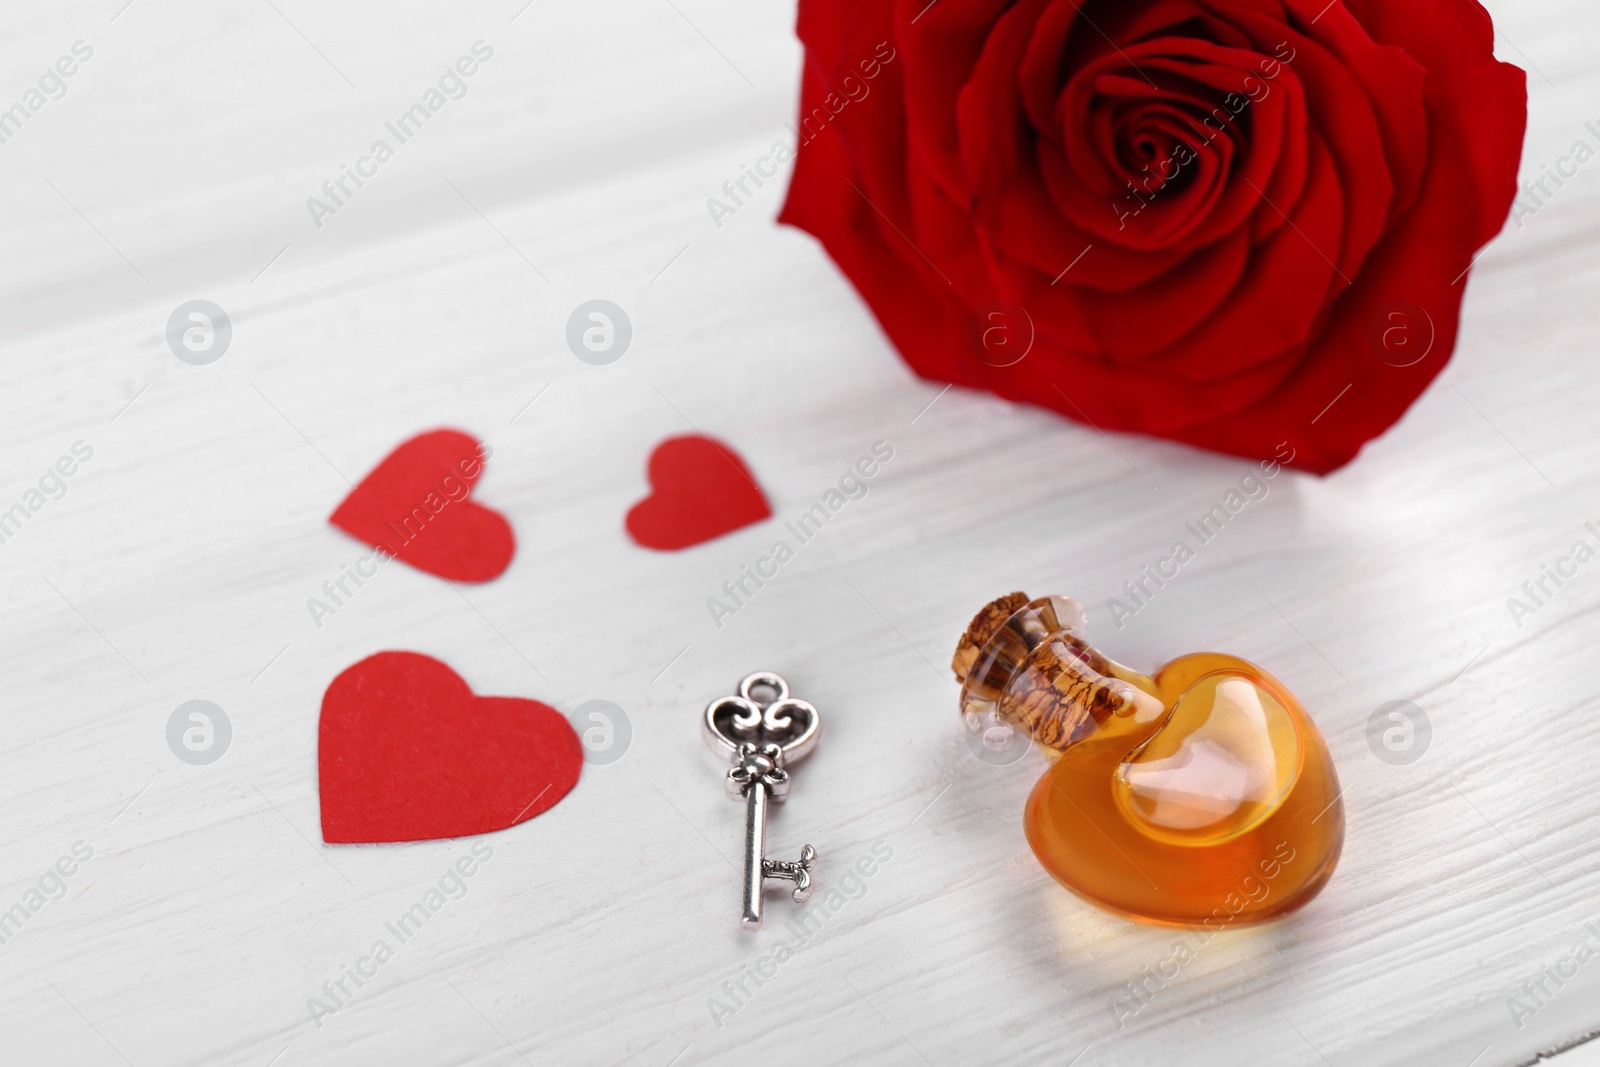 Photo of Heart shaped bottle of love potion with small key, paper hearts and red rose flower on white wooden table